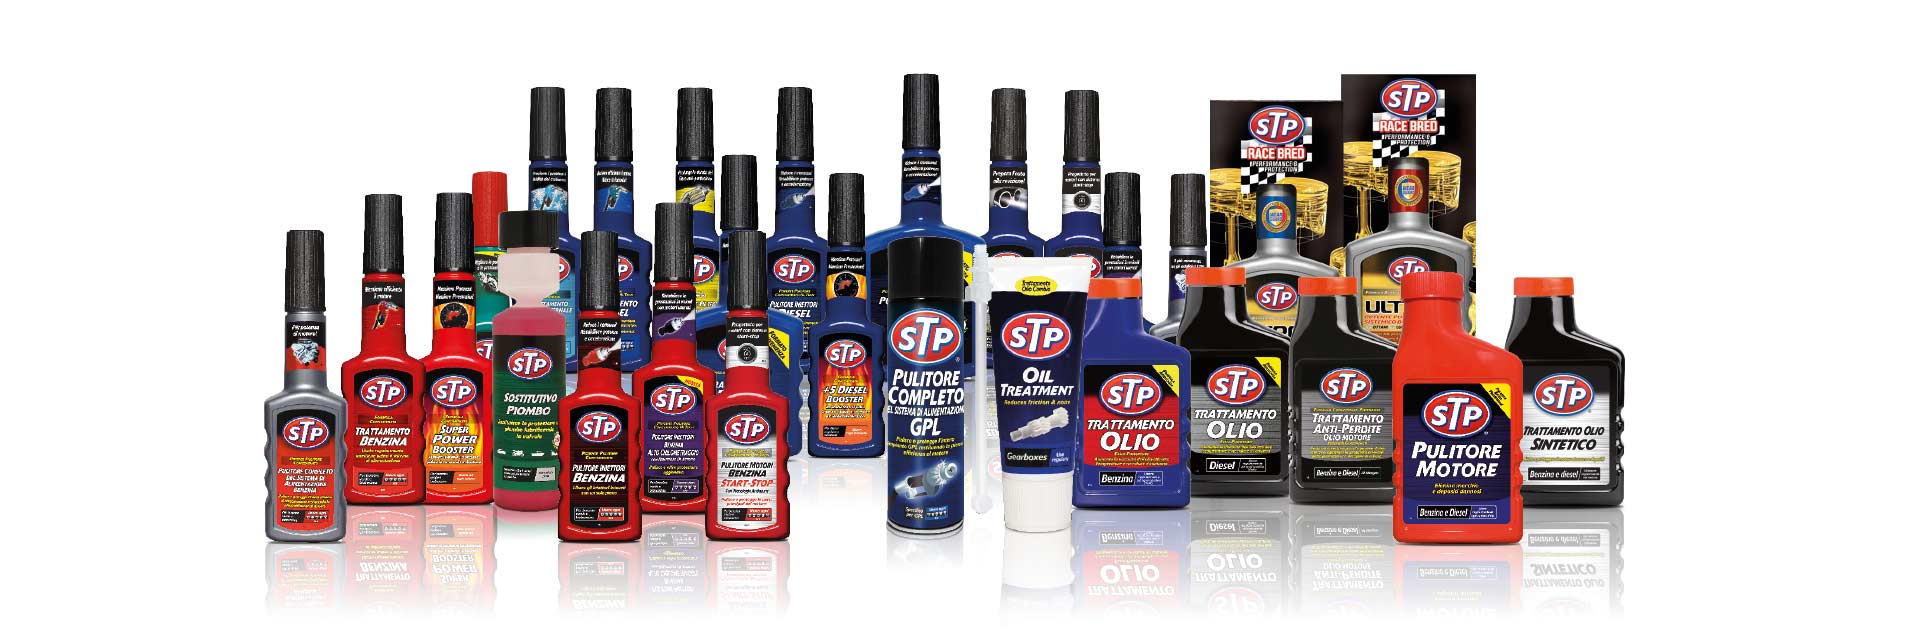 STP®: the business product line.